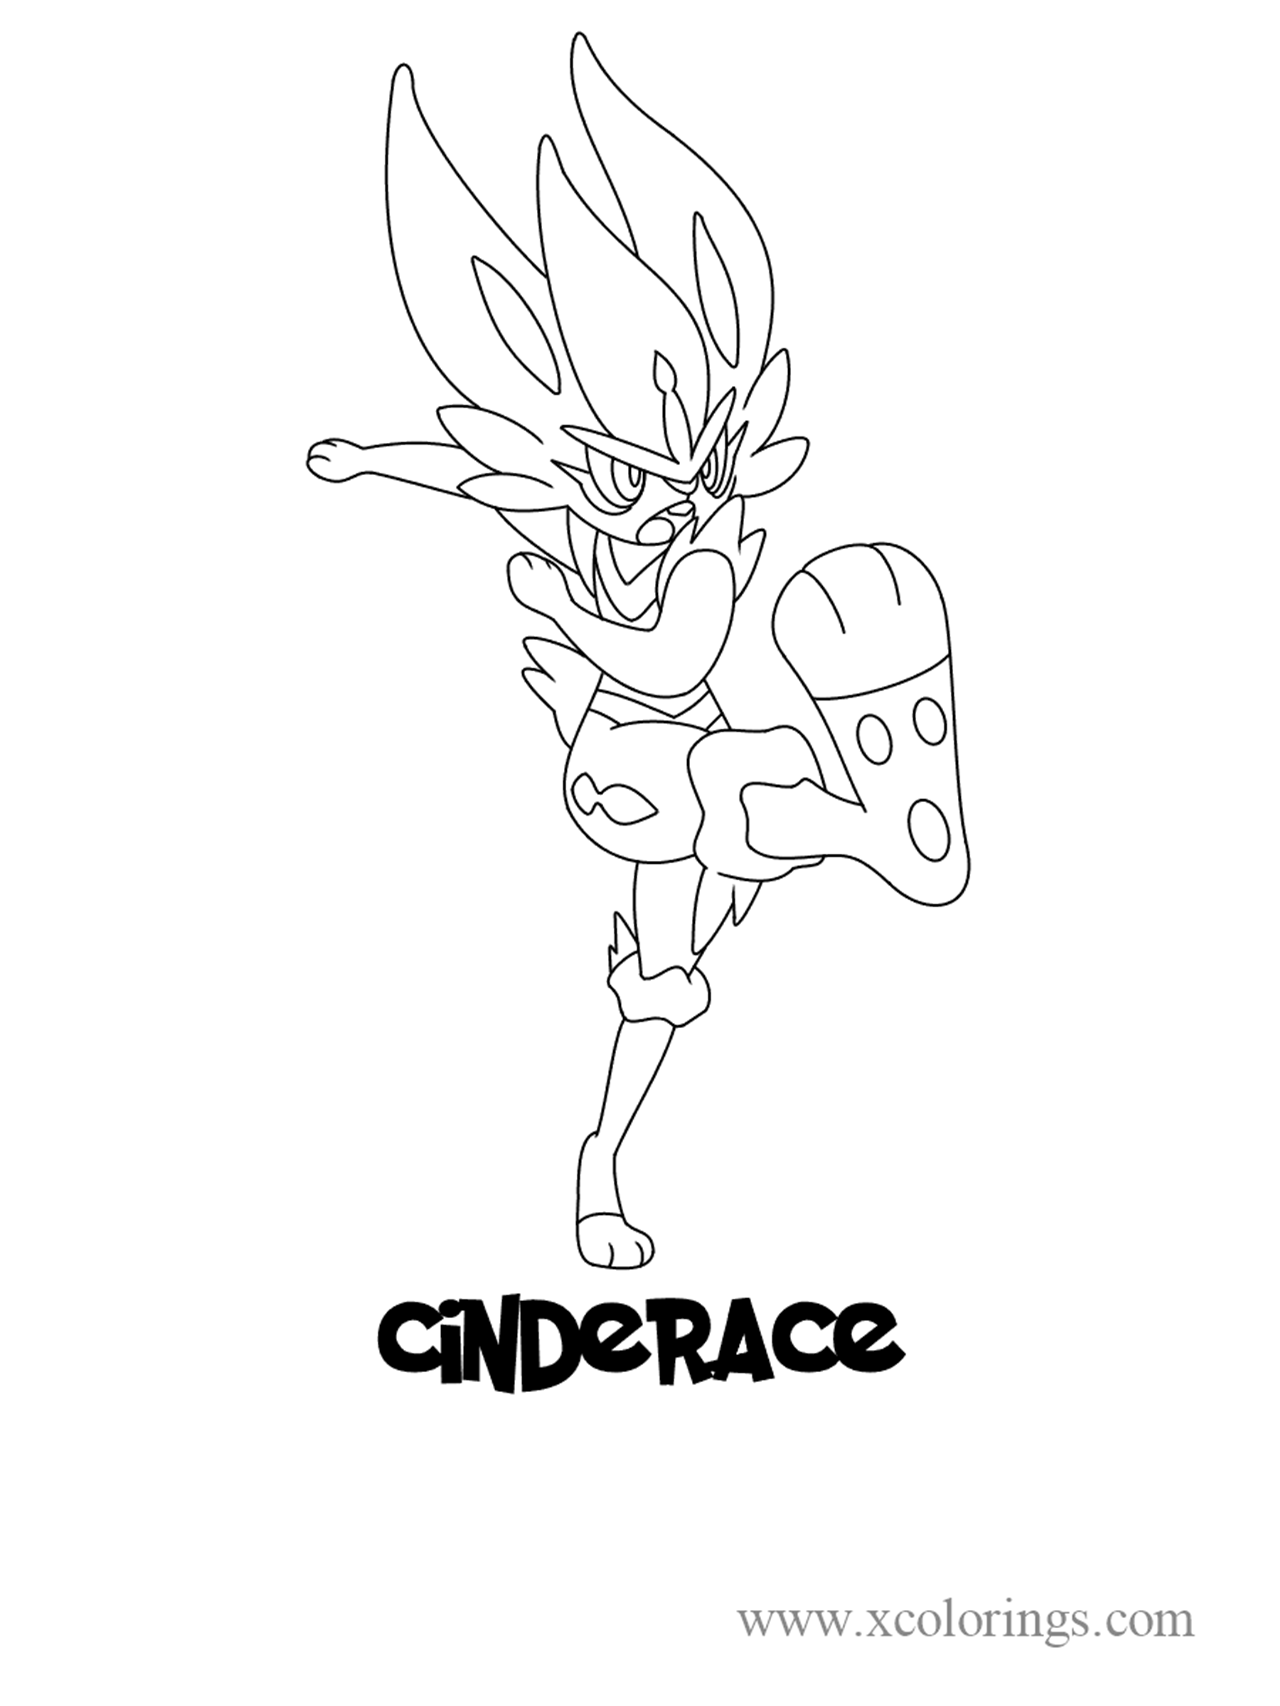 Pokemon sword and shield Cinderace Coloring Pages - XColorings